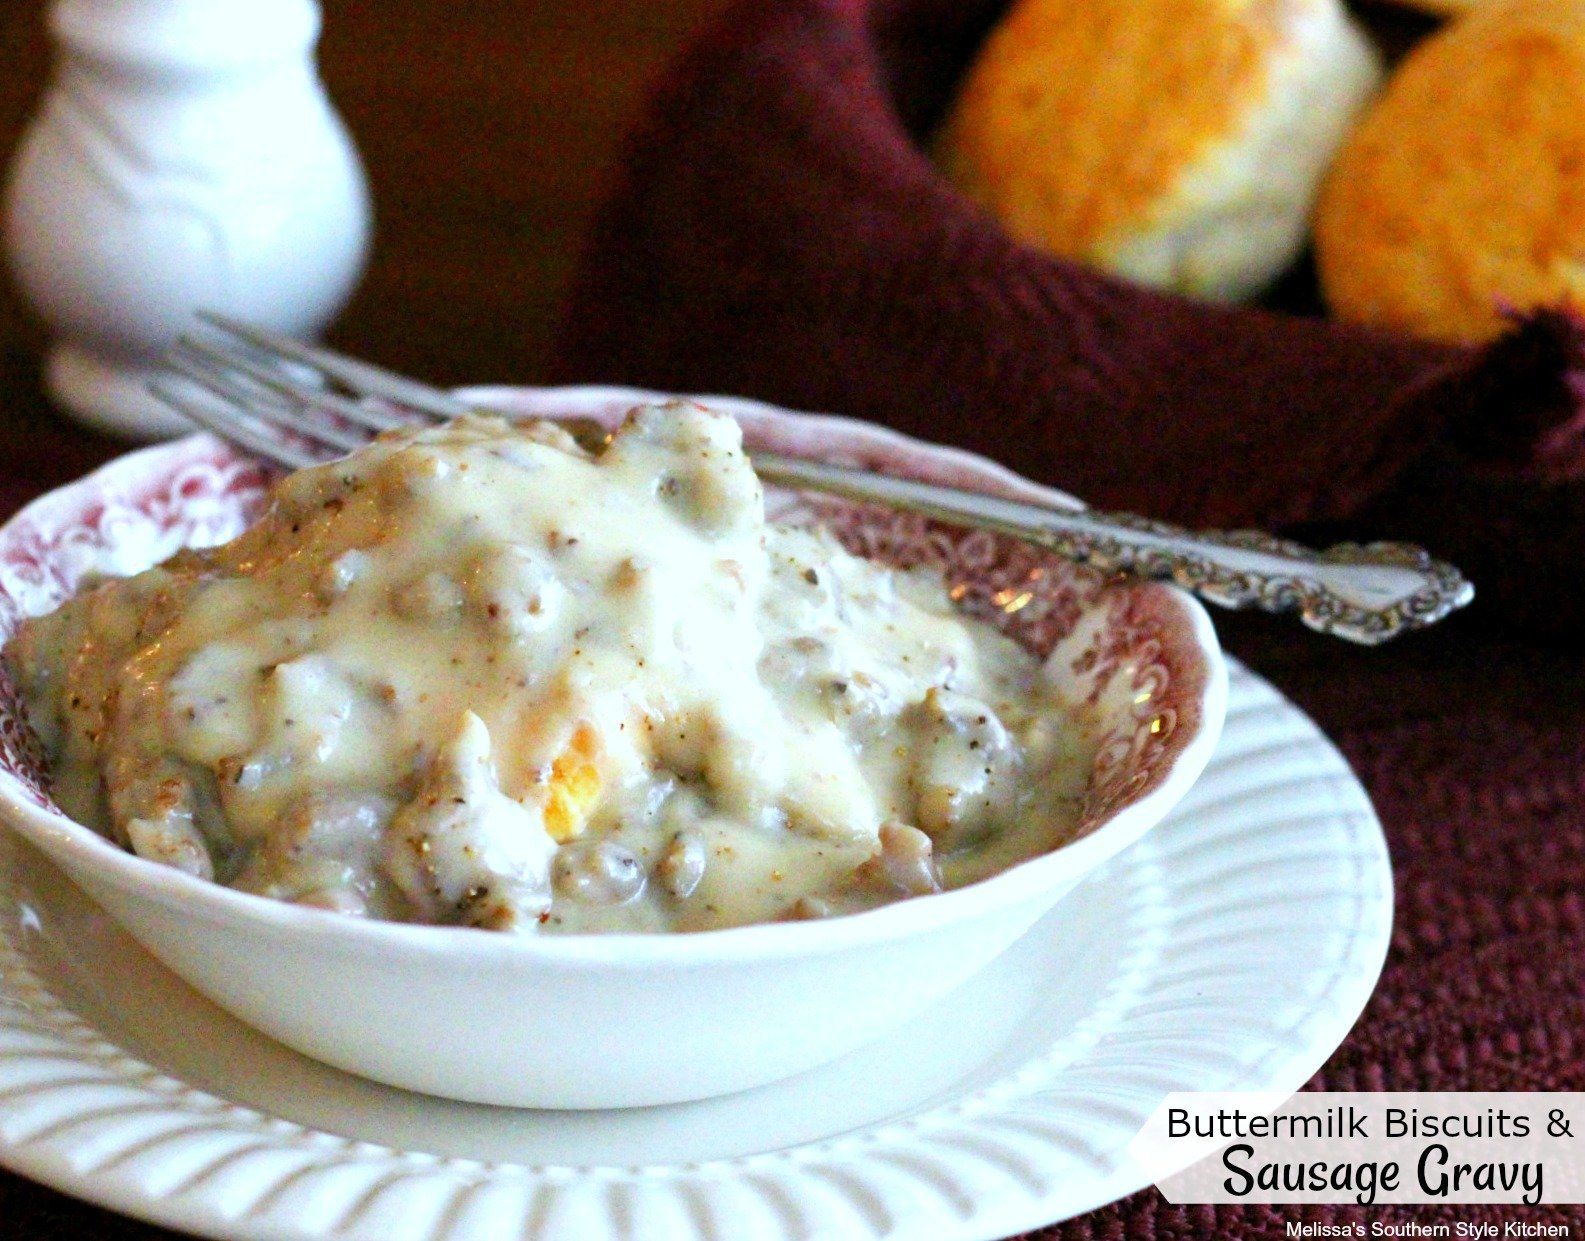 Buttermilk Biscuits And Sausage Gravy in a bowl